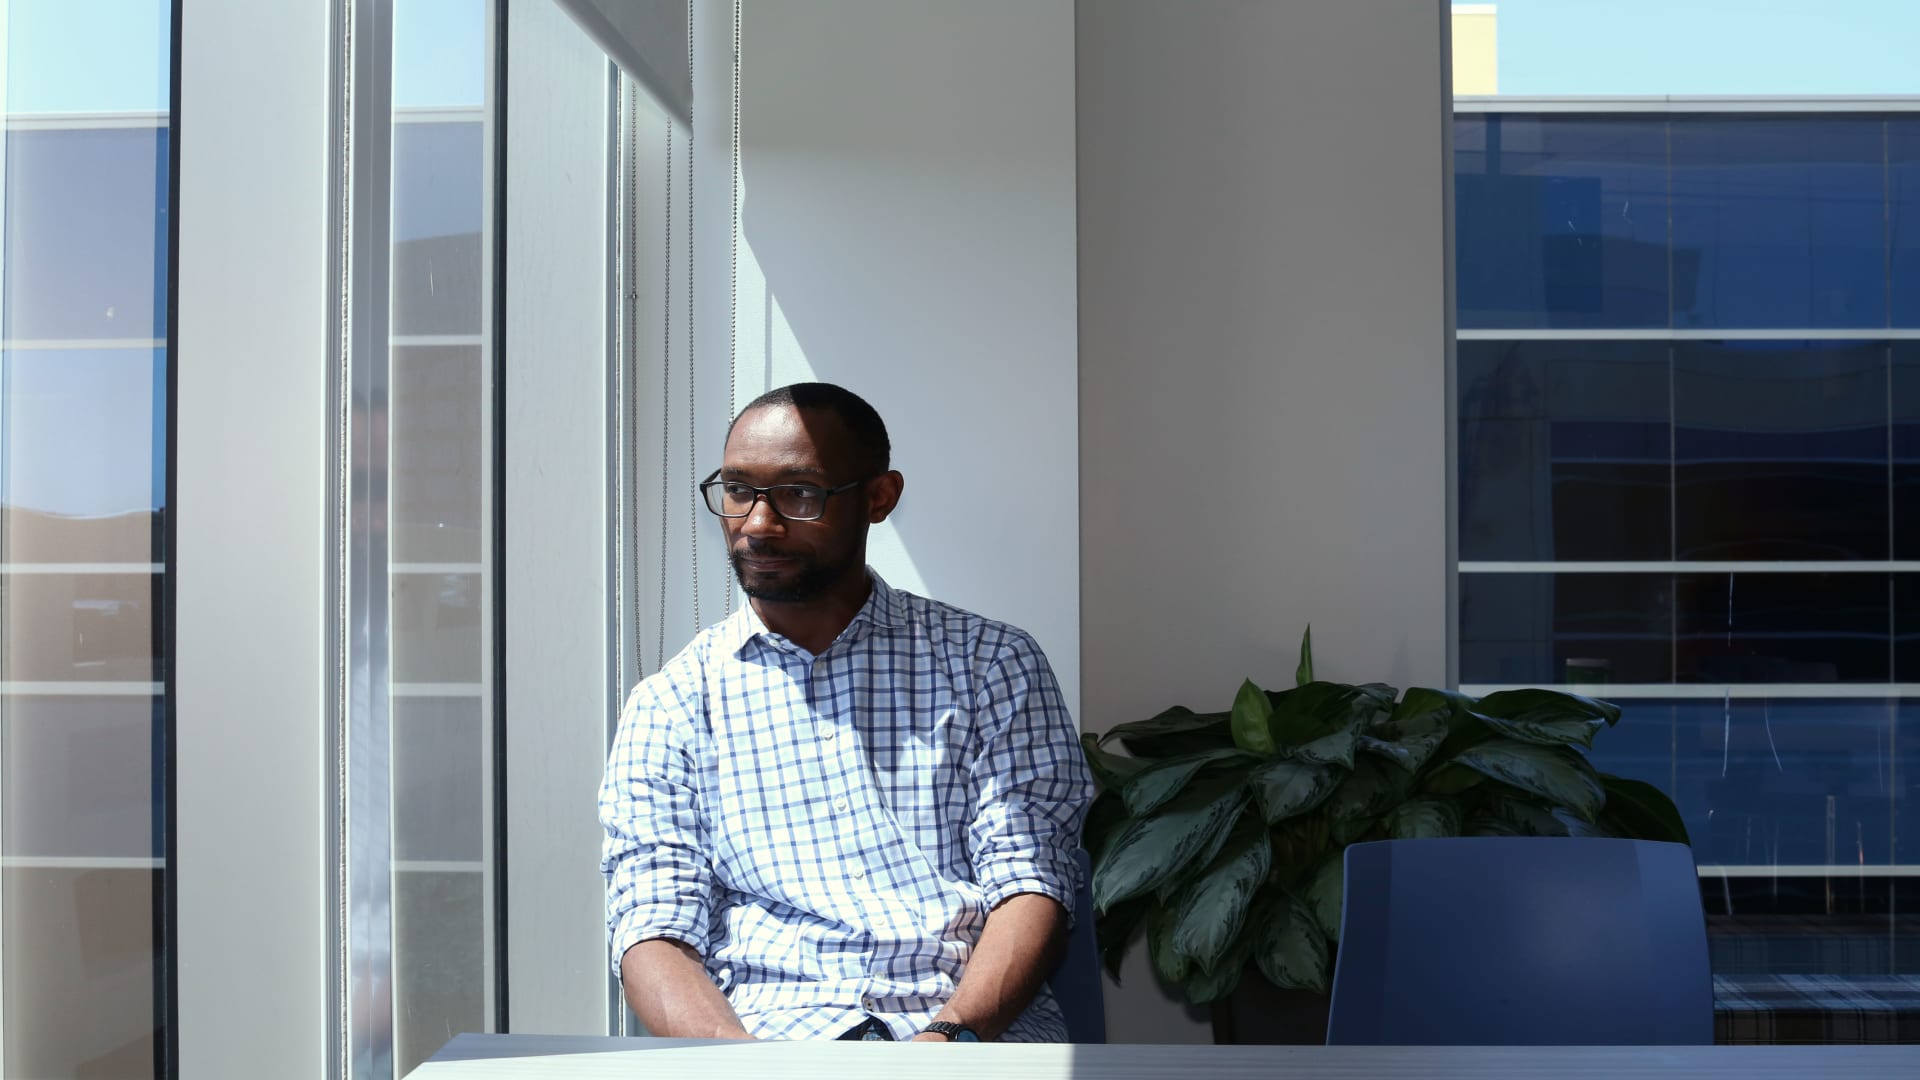 An influential software engineer within Google, Anthony Mays left the company after eight years to pursue his own diversity and inclusion consulting firm.